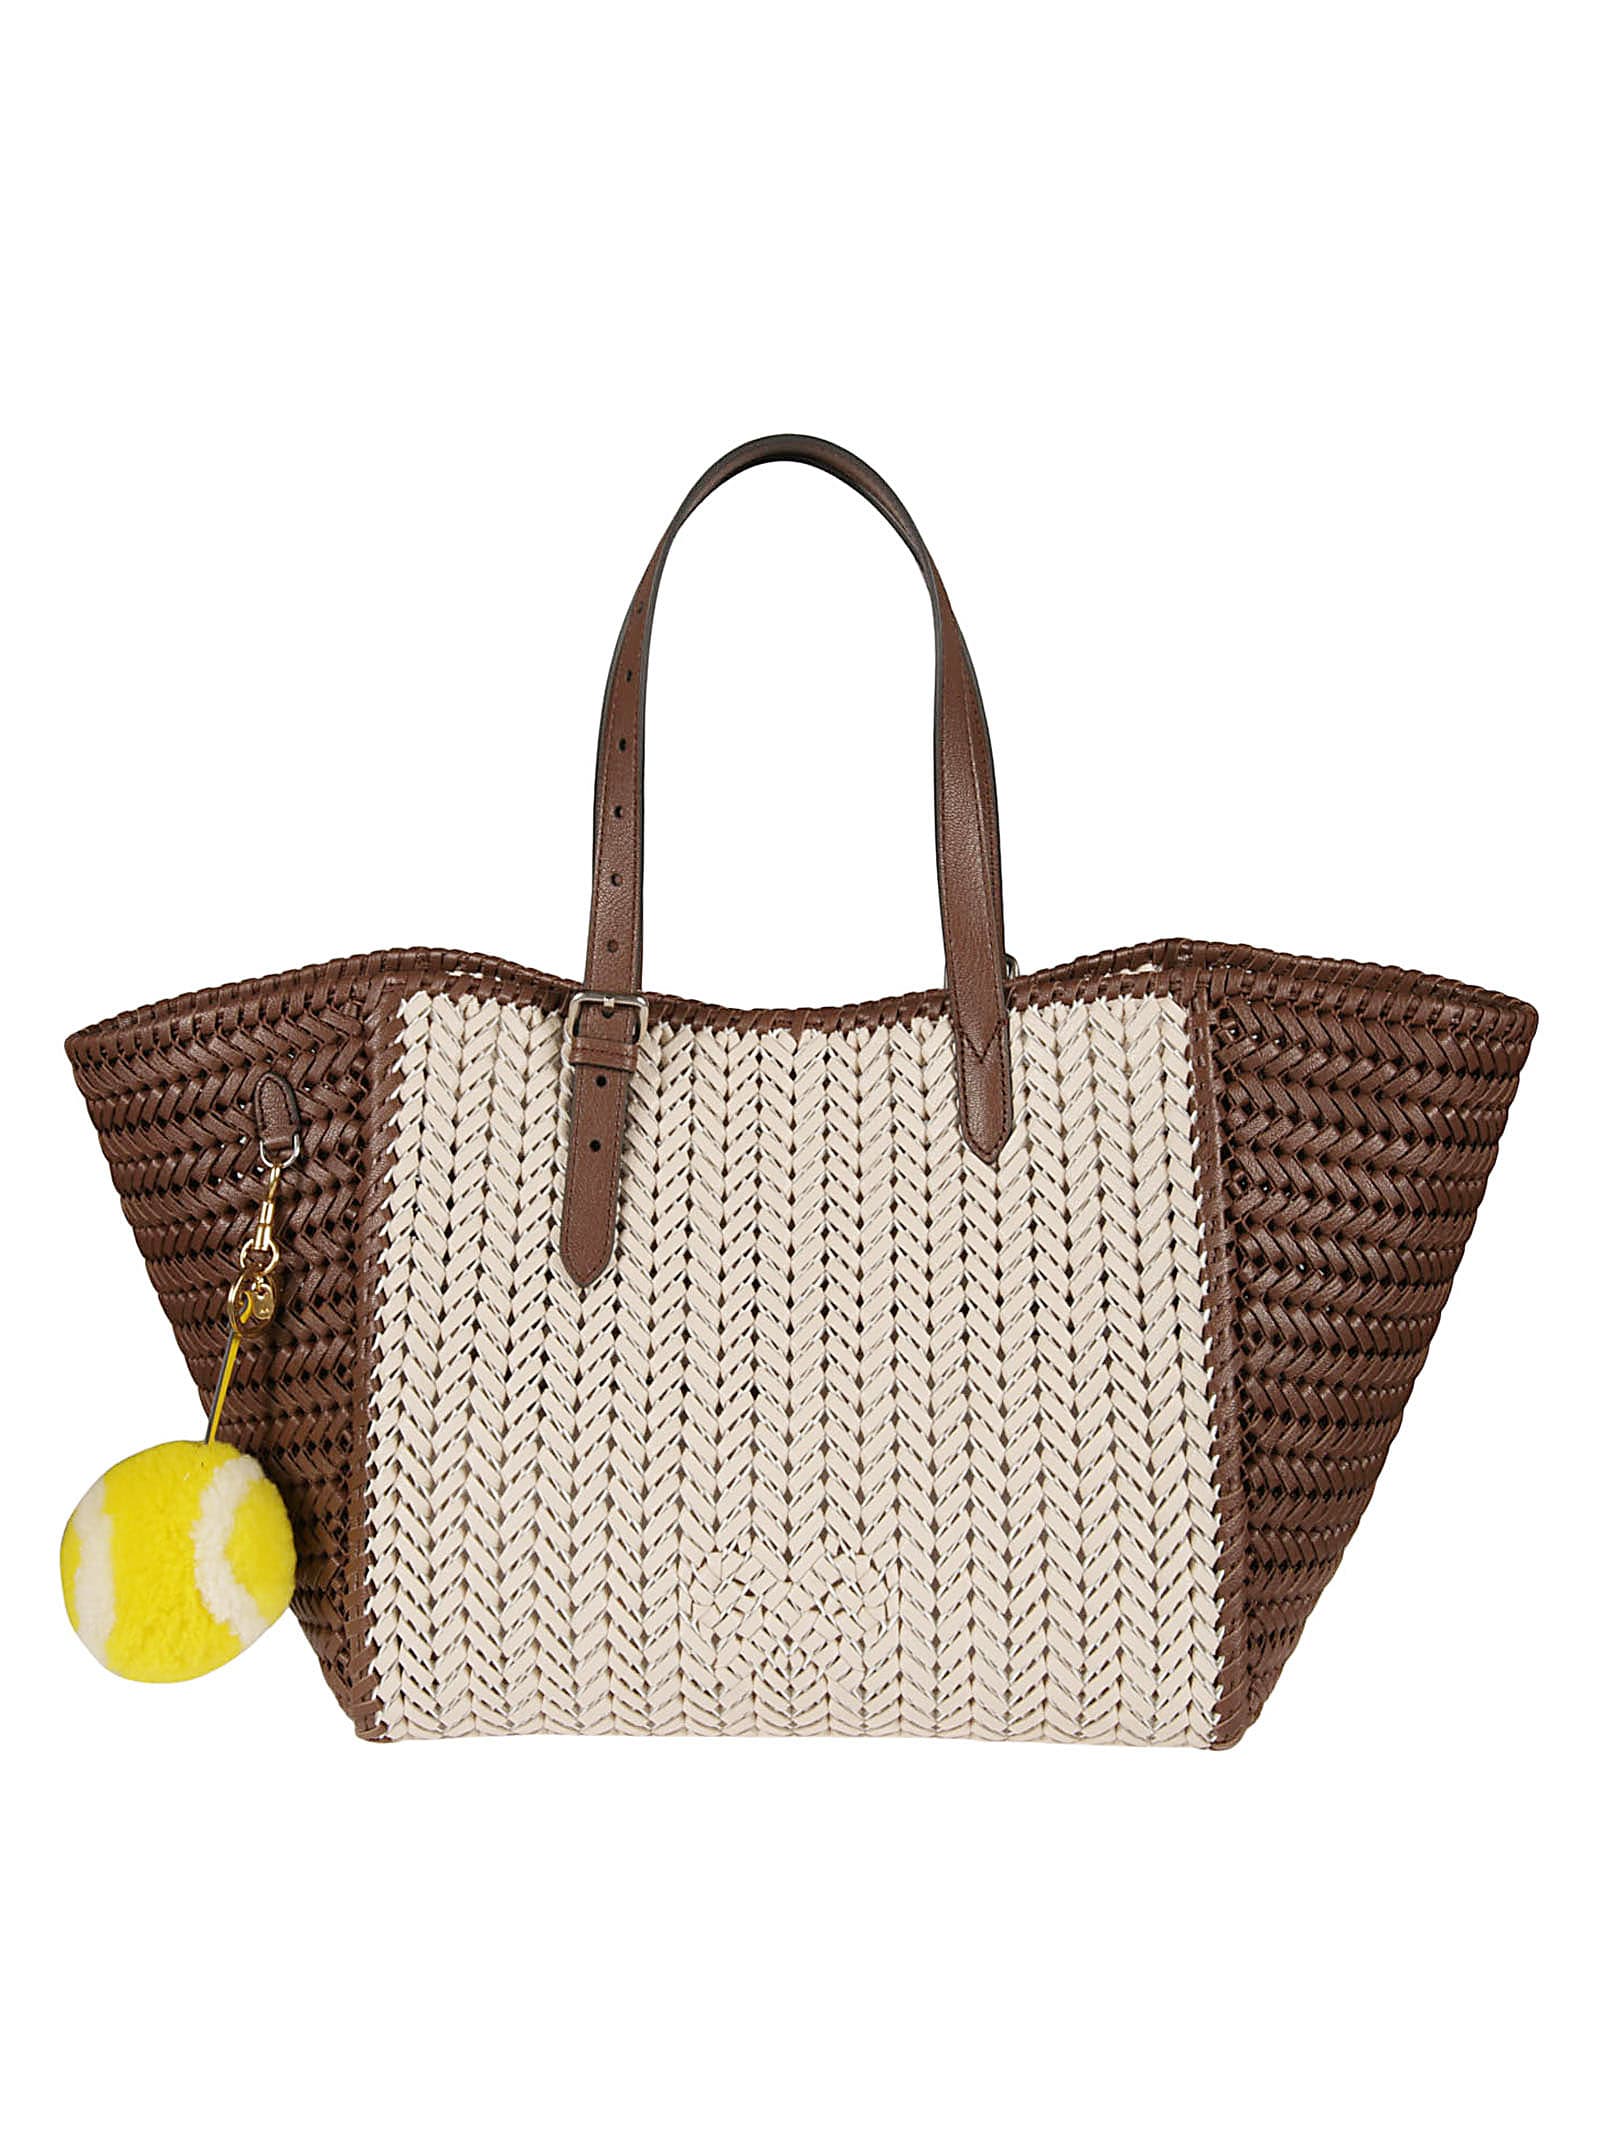 Anya Hindmarch Buckled Top Handle Woven Embellished Tote